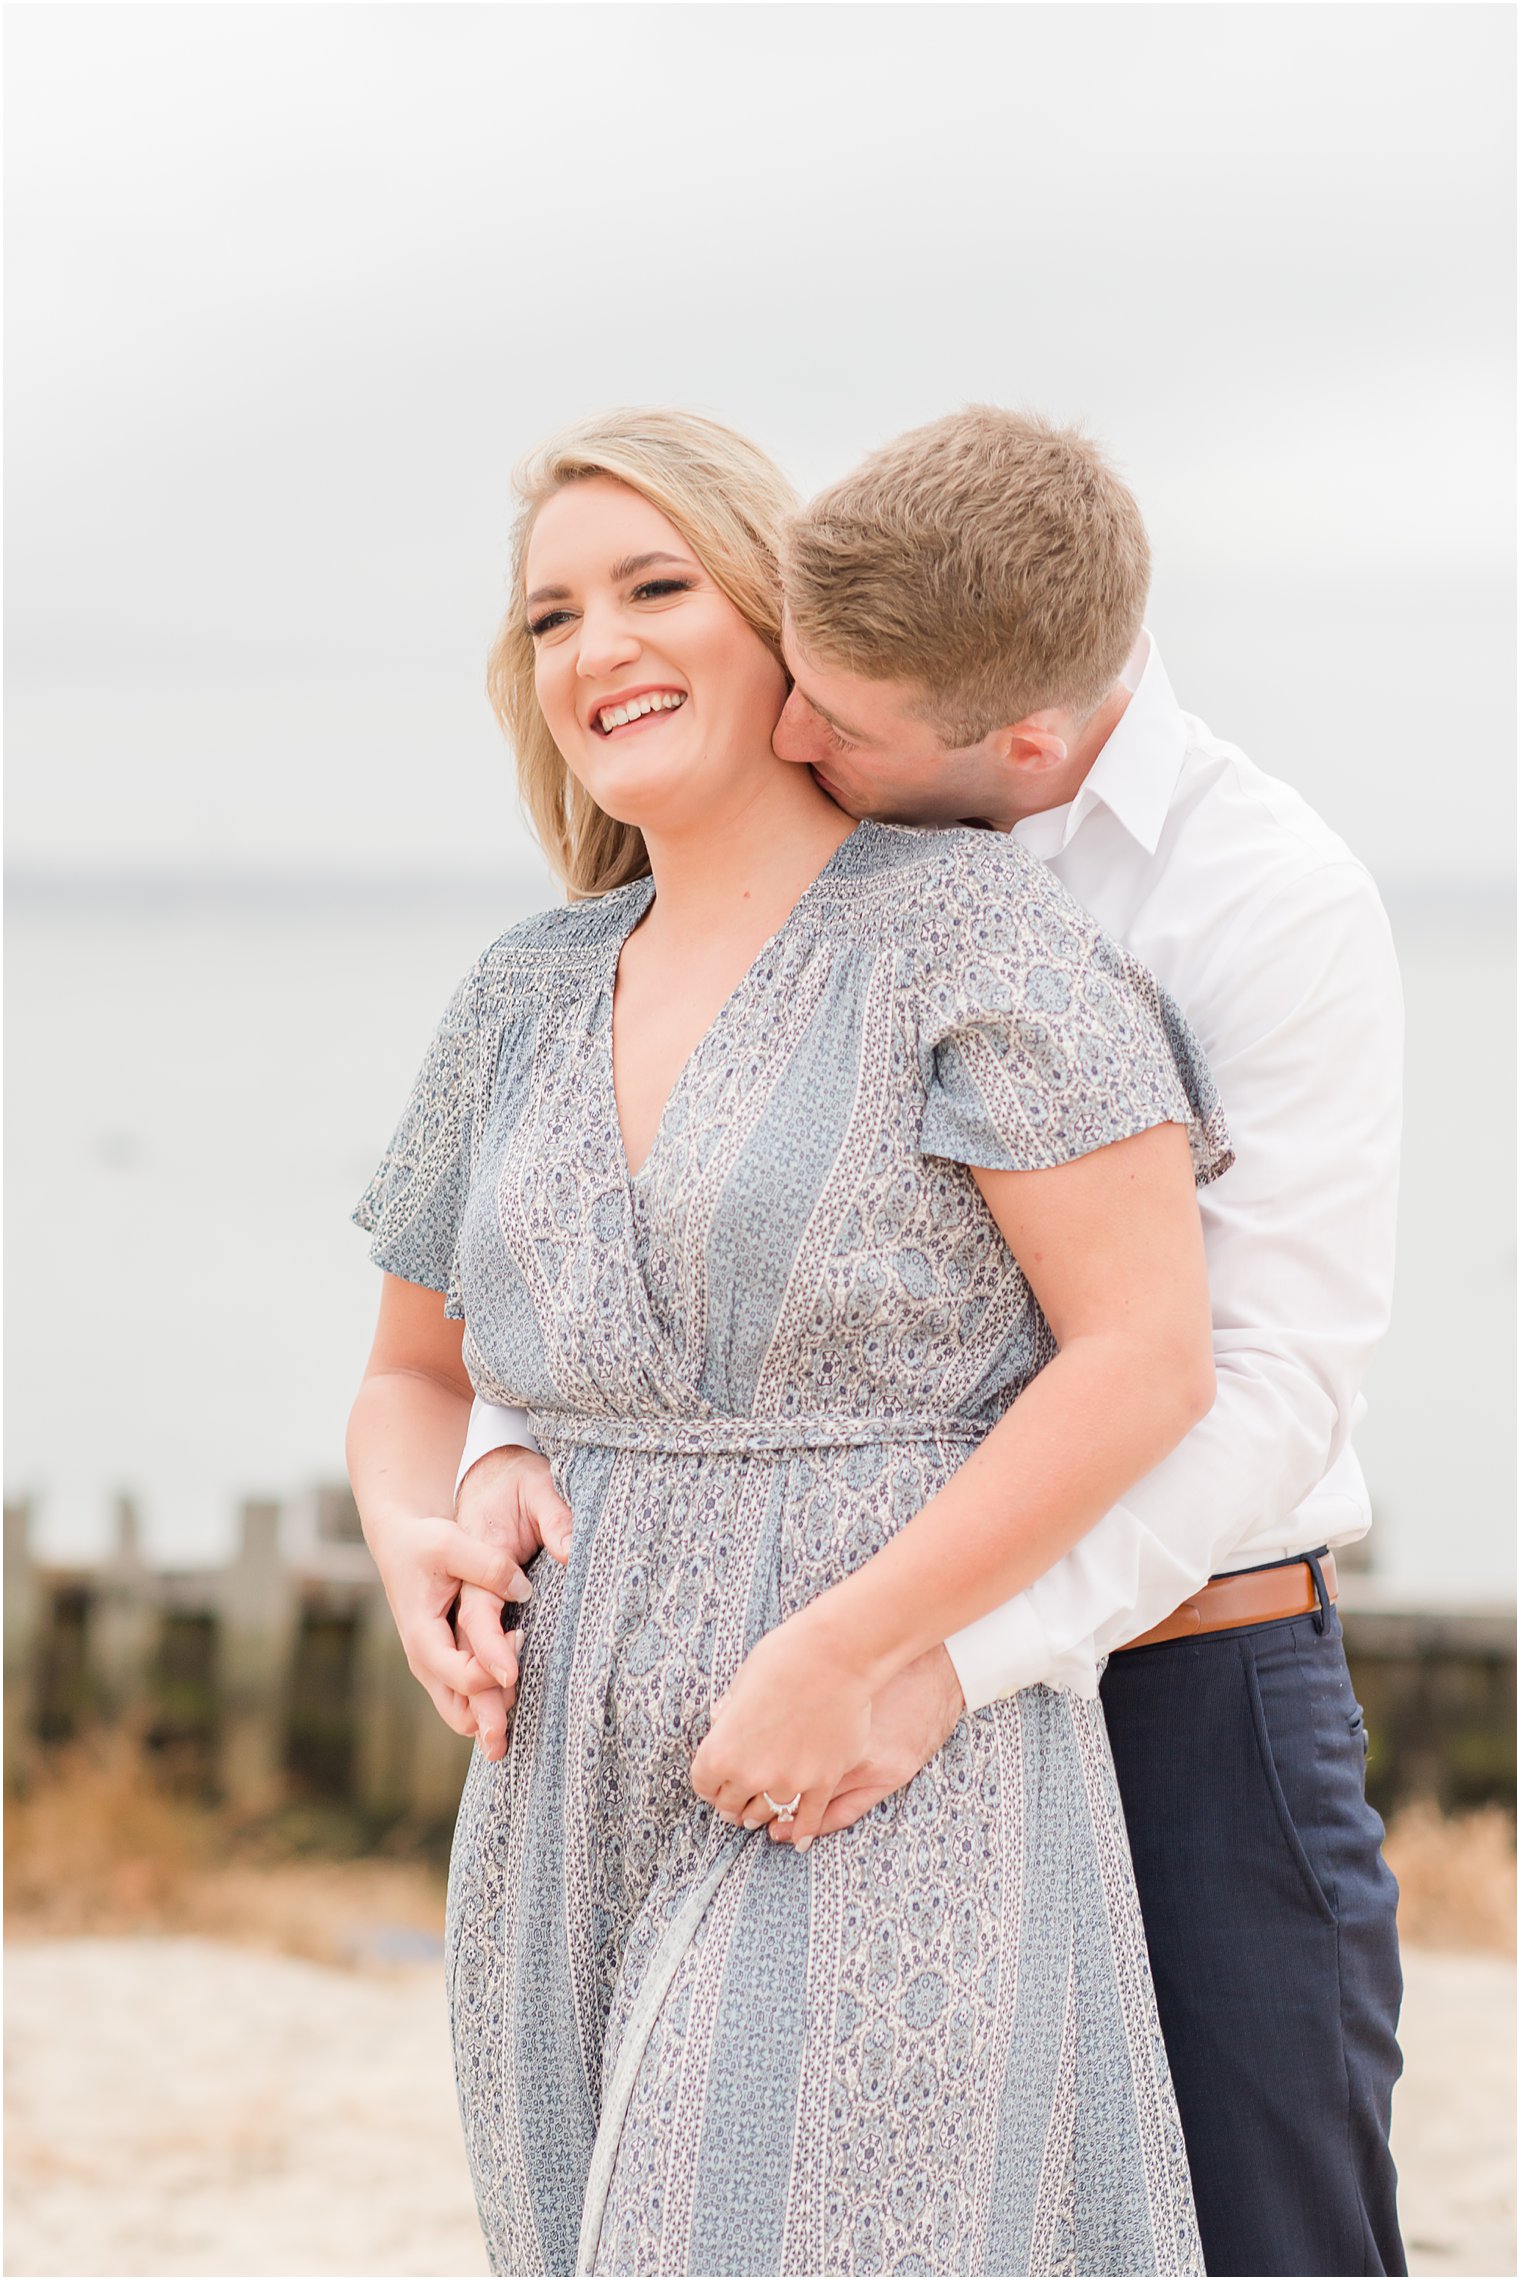 groom kisses bride's neck during New Jersey engagement photos